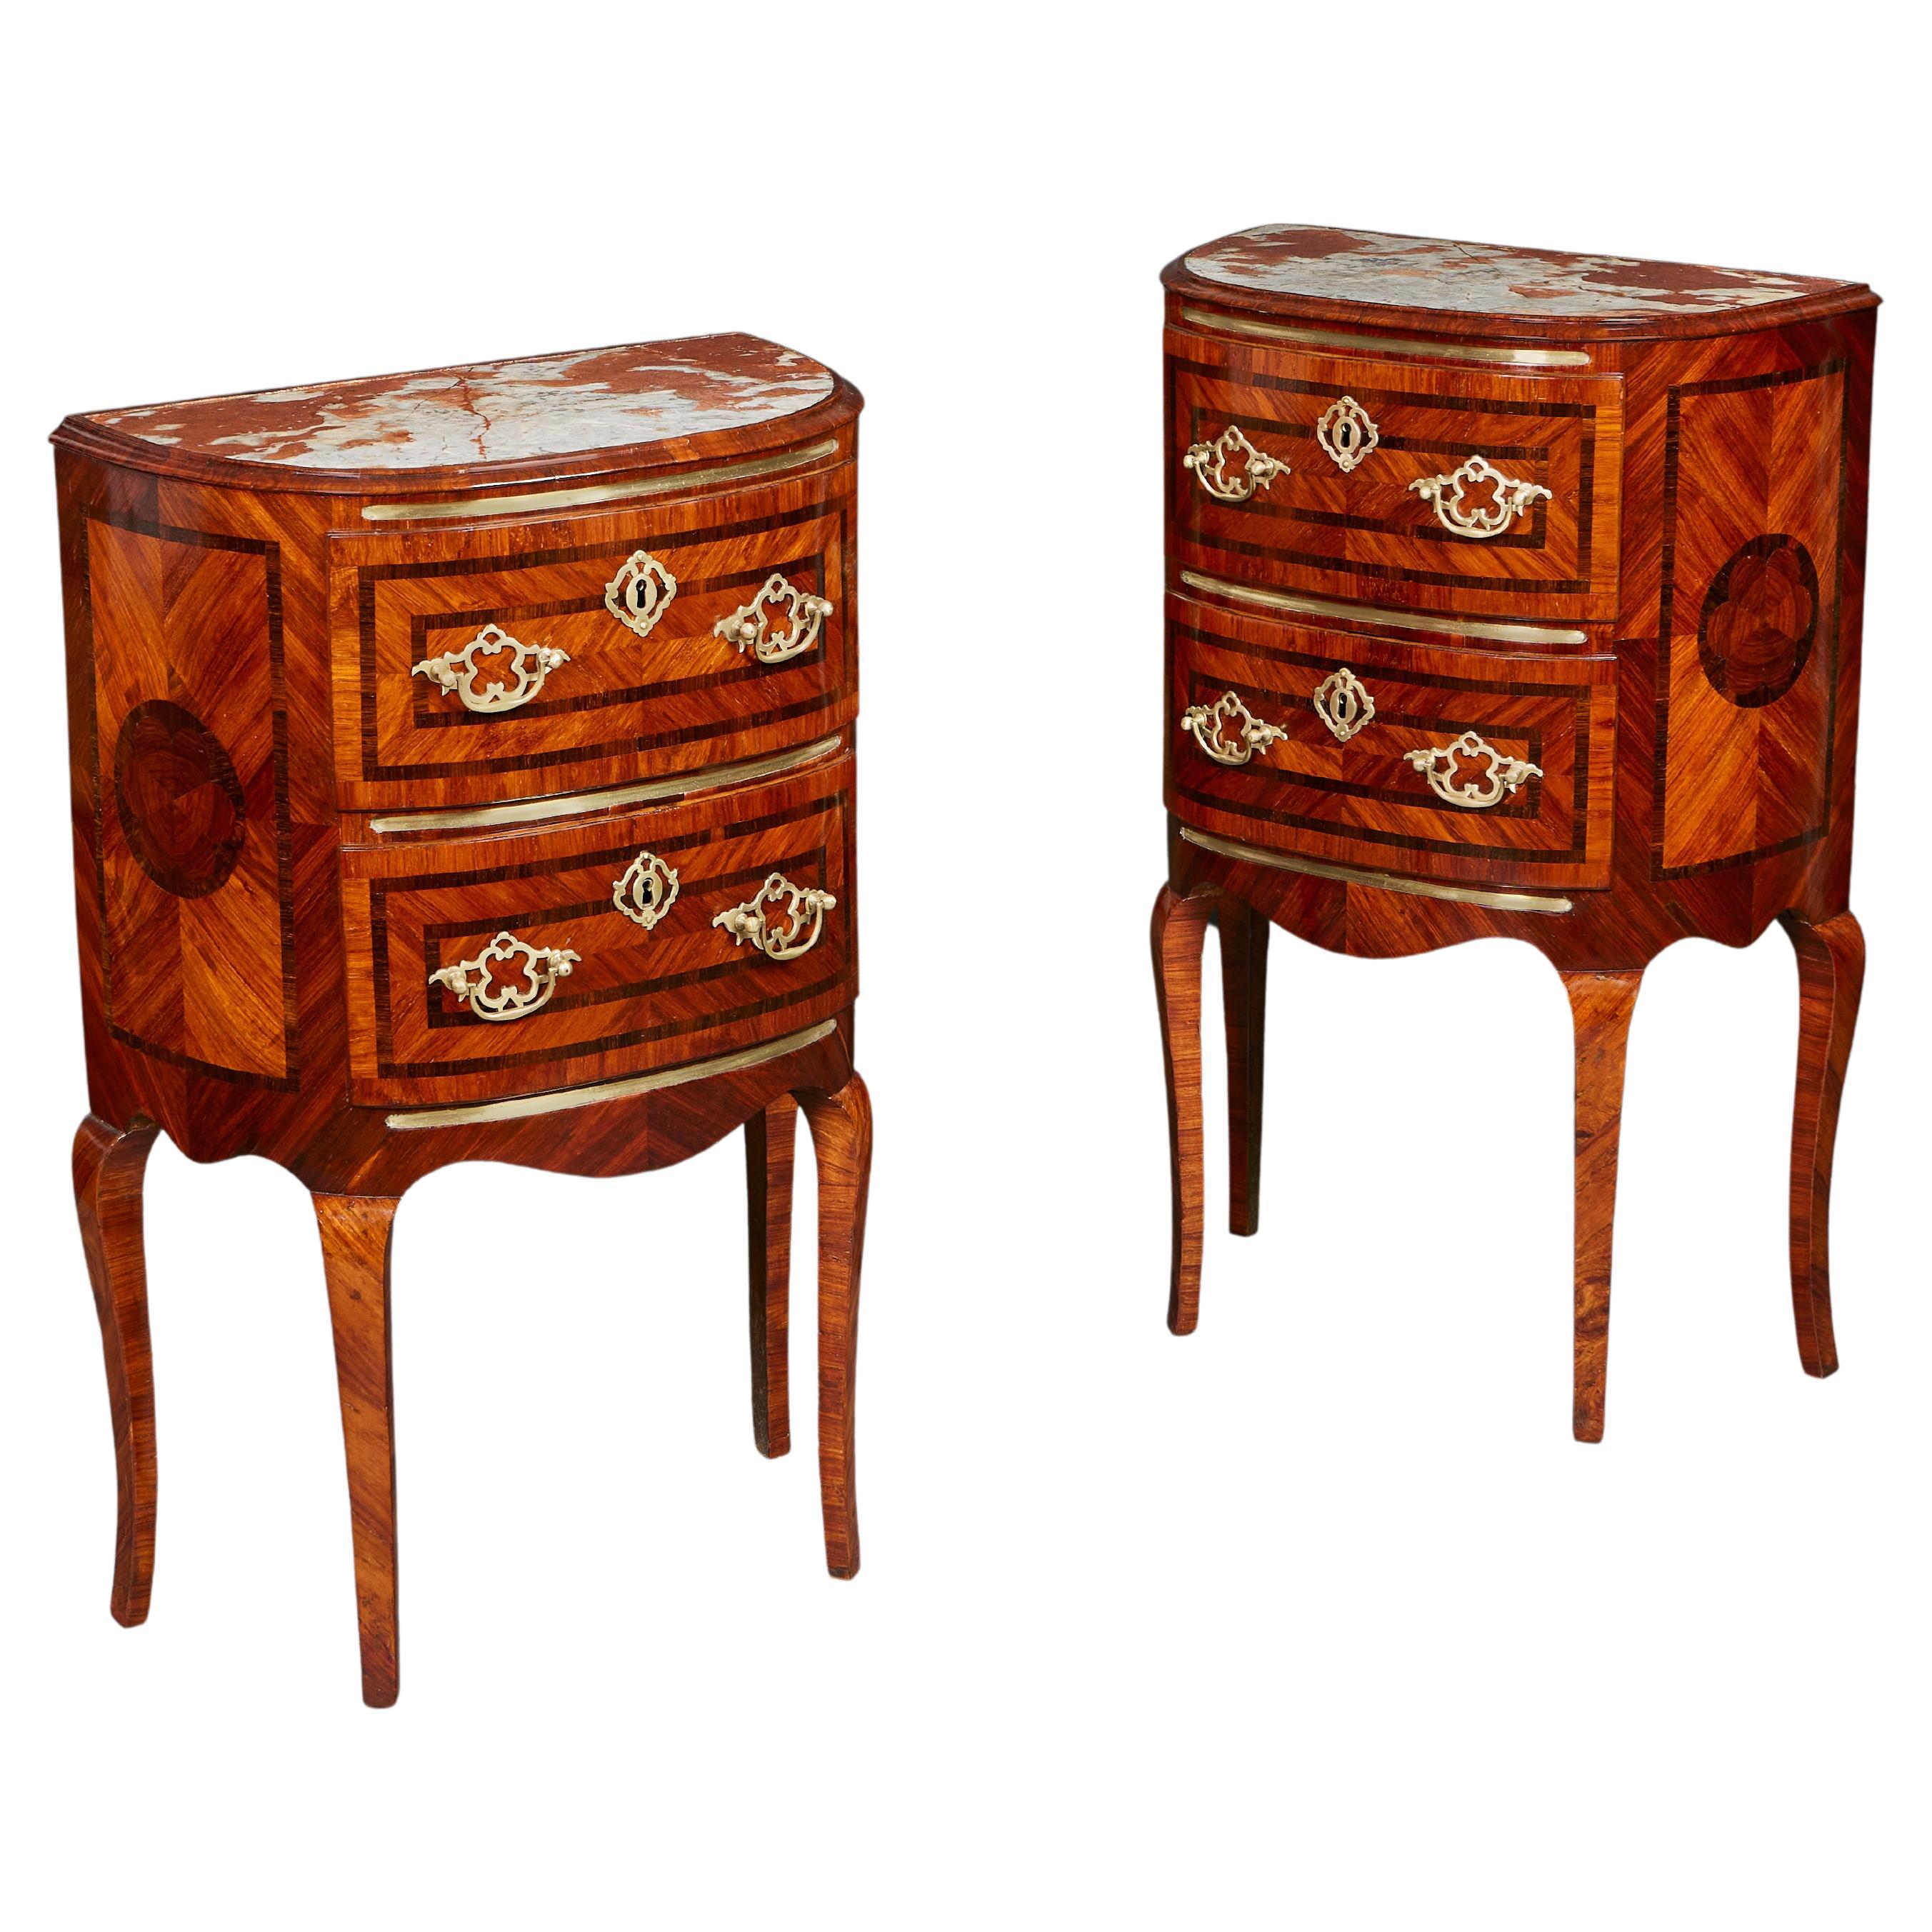 A Pair of 19th Century Roman Bedside Tables with Marquetry and Marble Tops